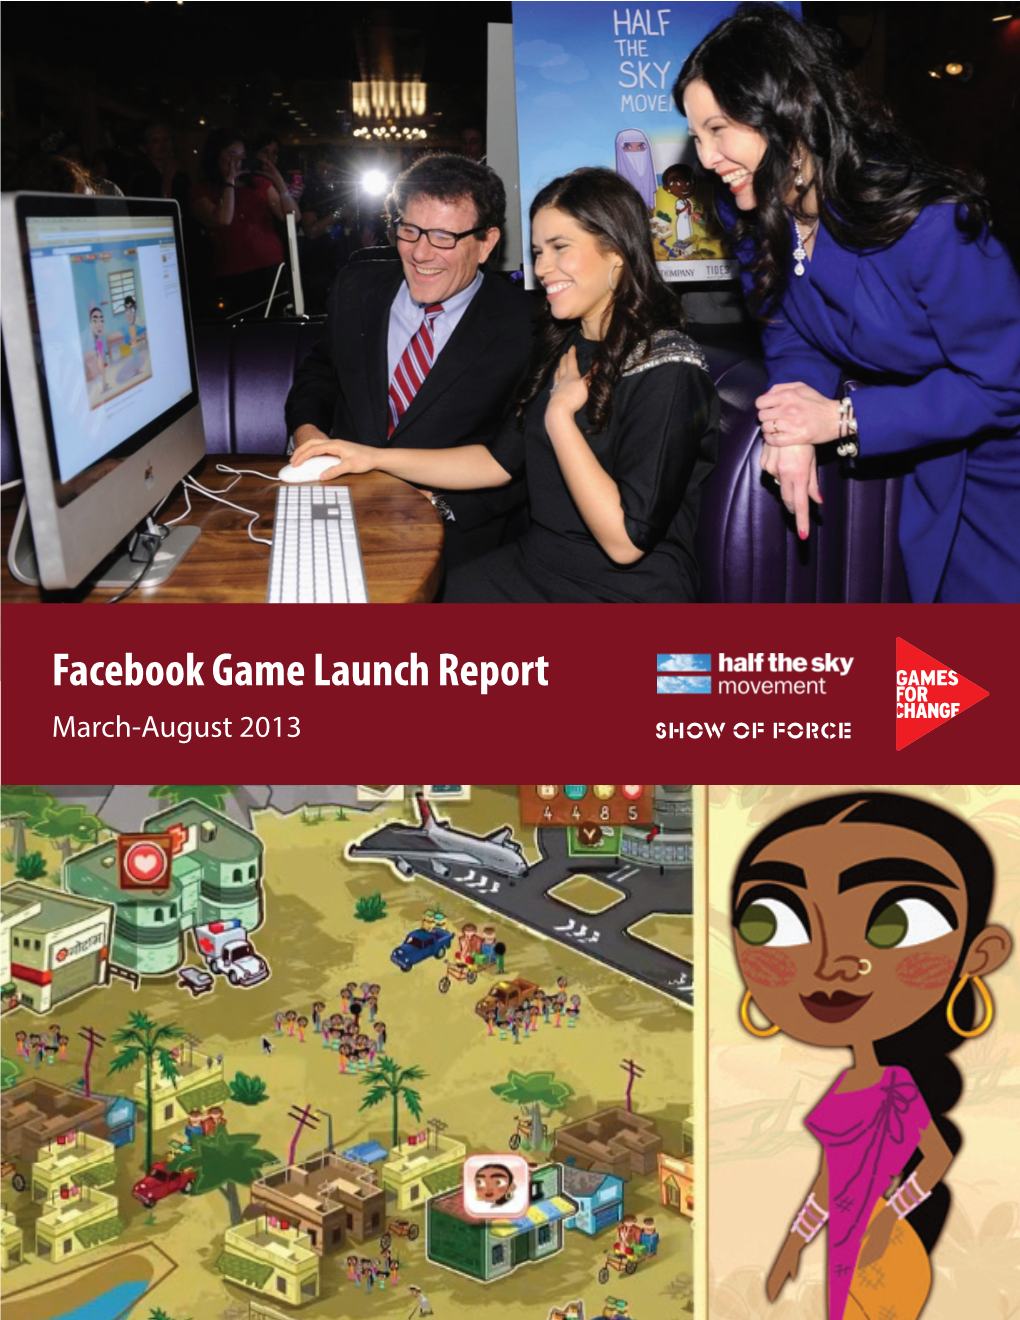 Facebook Game Launch Report March-August 2013 Michelle Byrd and Asi Burak, Co-Presidents of Games for Change